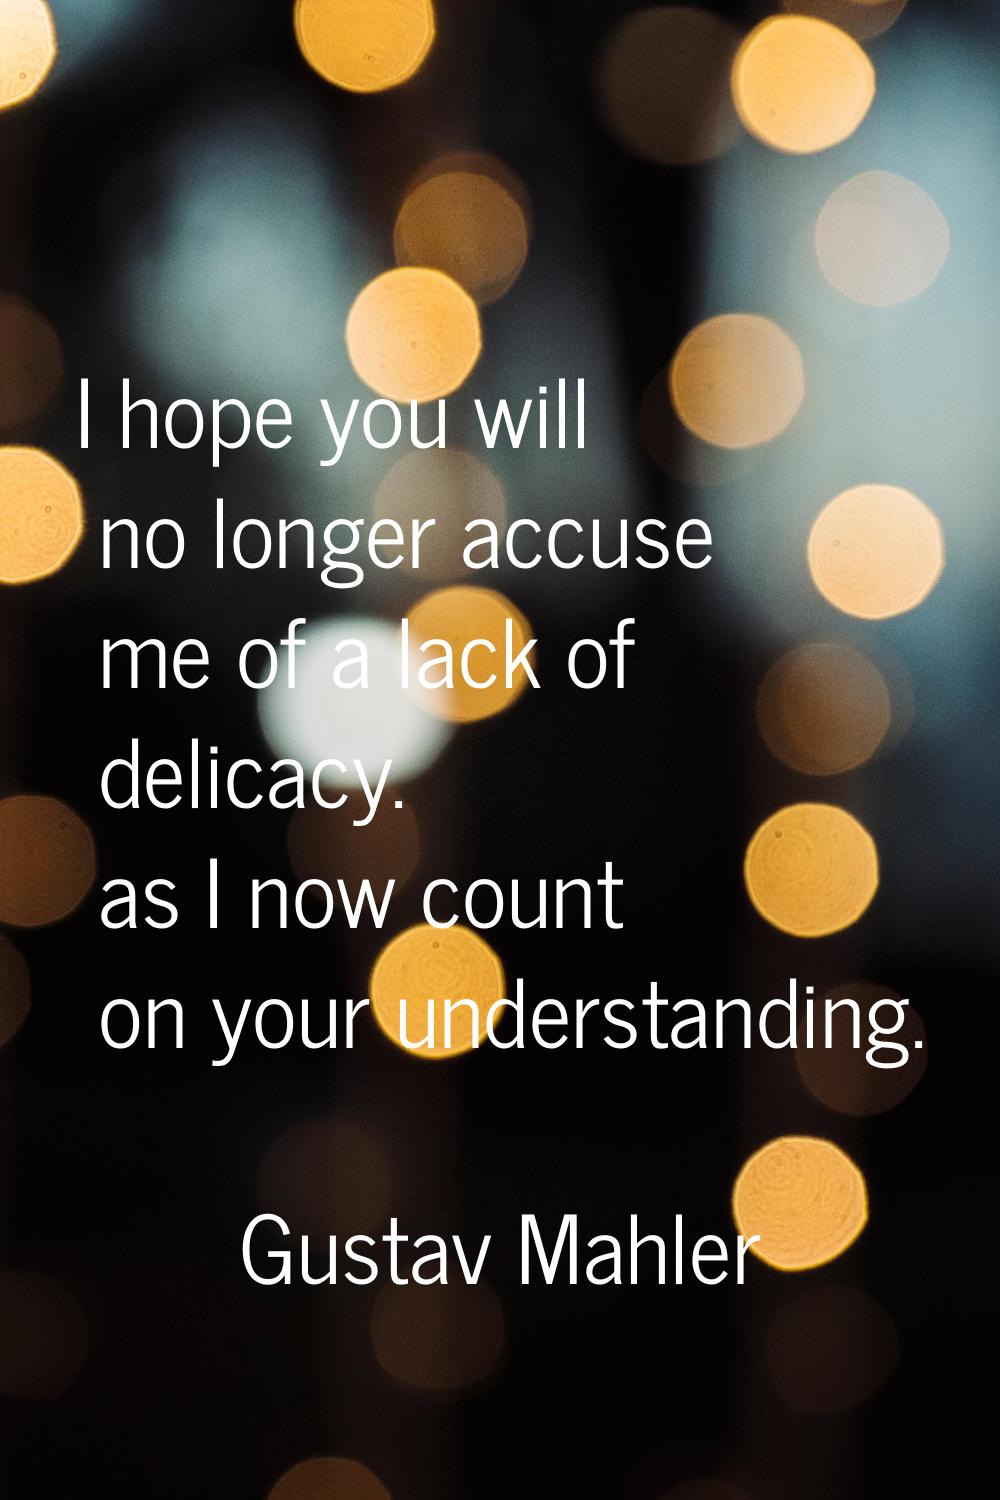 I hope you will no longer accuse me of a lack of delicacy. as I now count on your understanding.